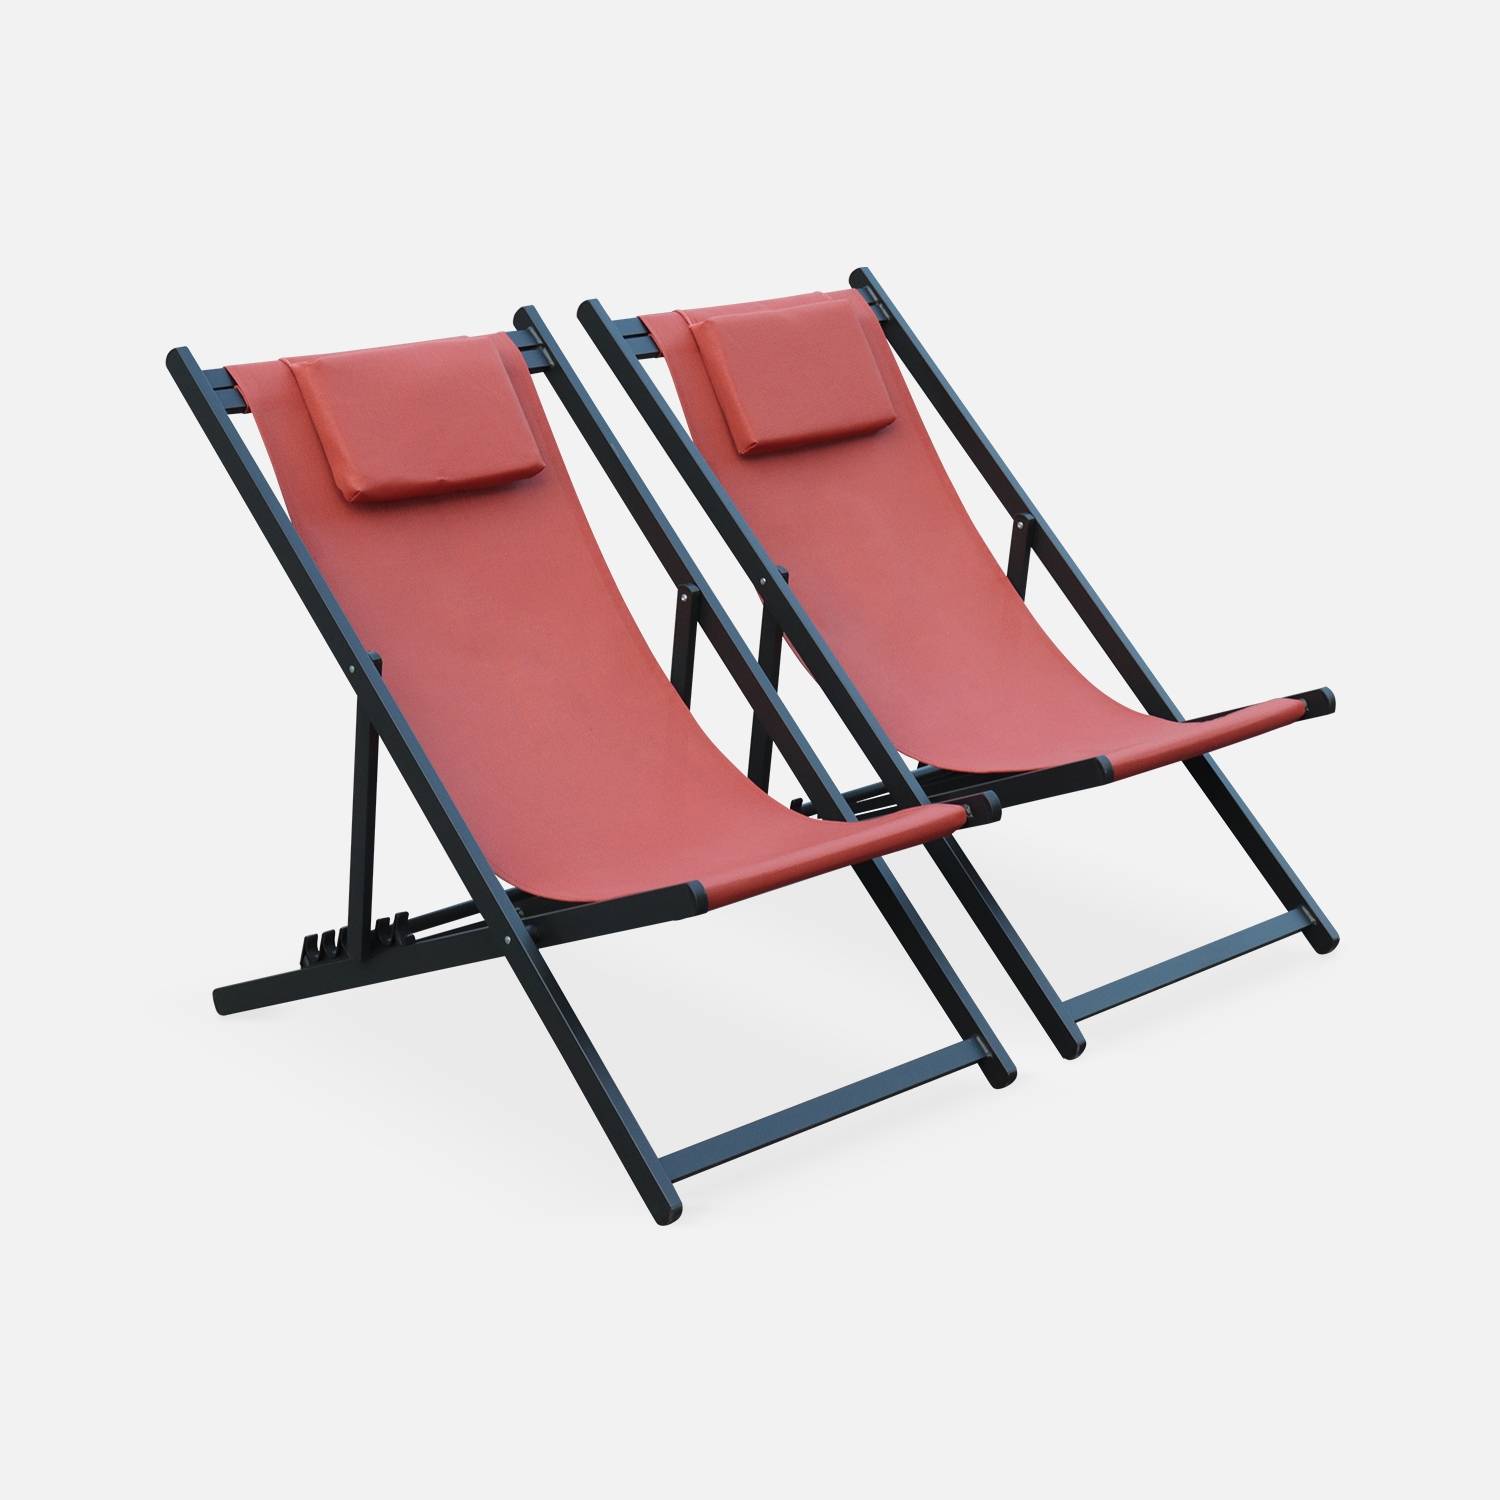 Set of 2 sun loungers - aluminium and texilene adjustable deck chairs with headrest, Anthracite/Terracotta  | sweeek